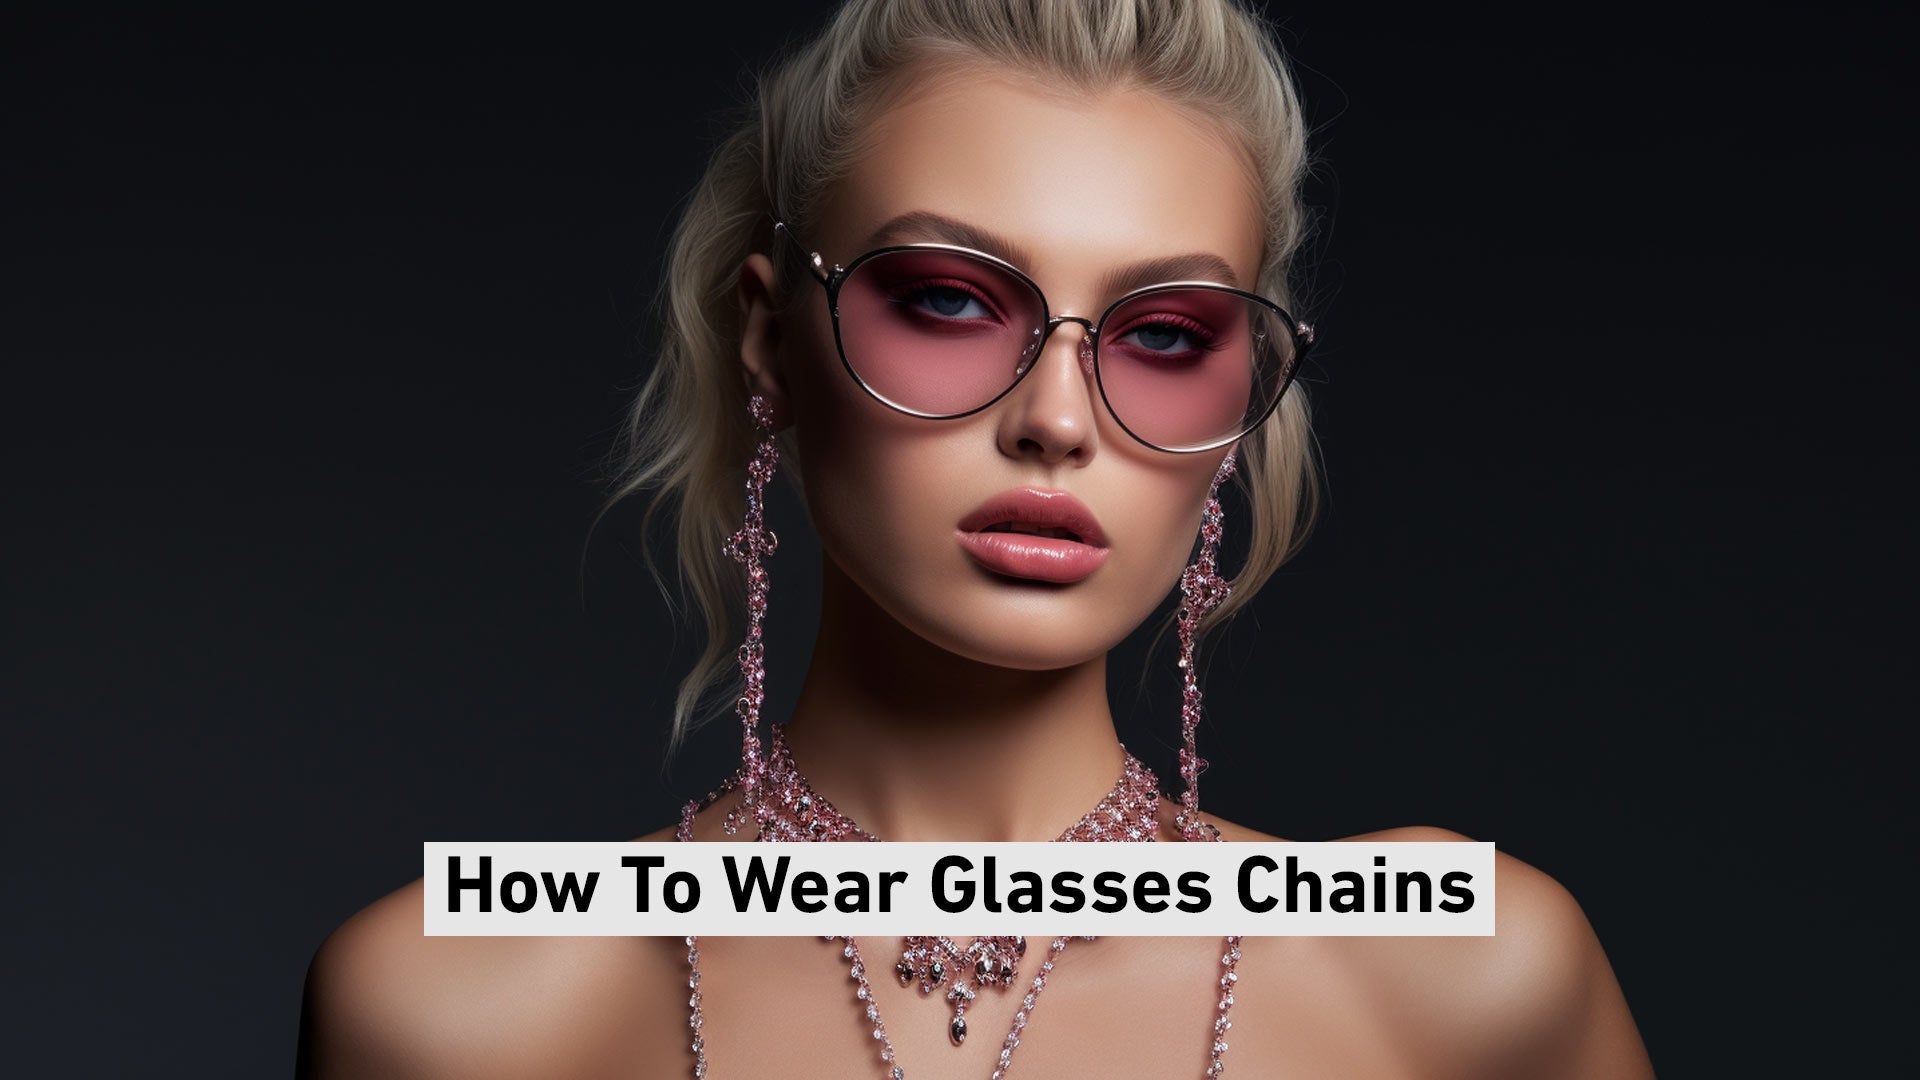 How To Wear Glasses Chains